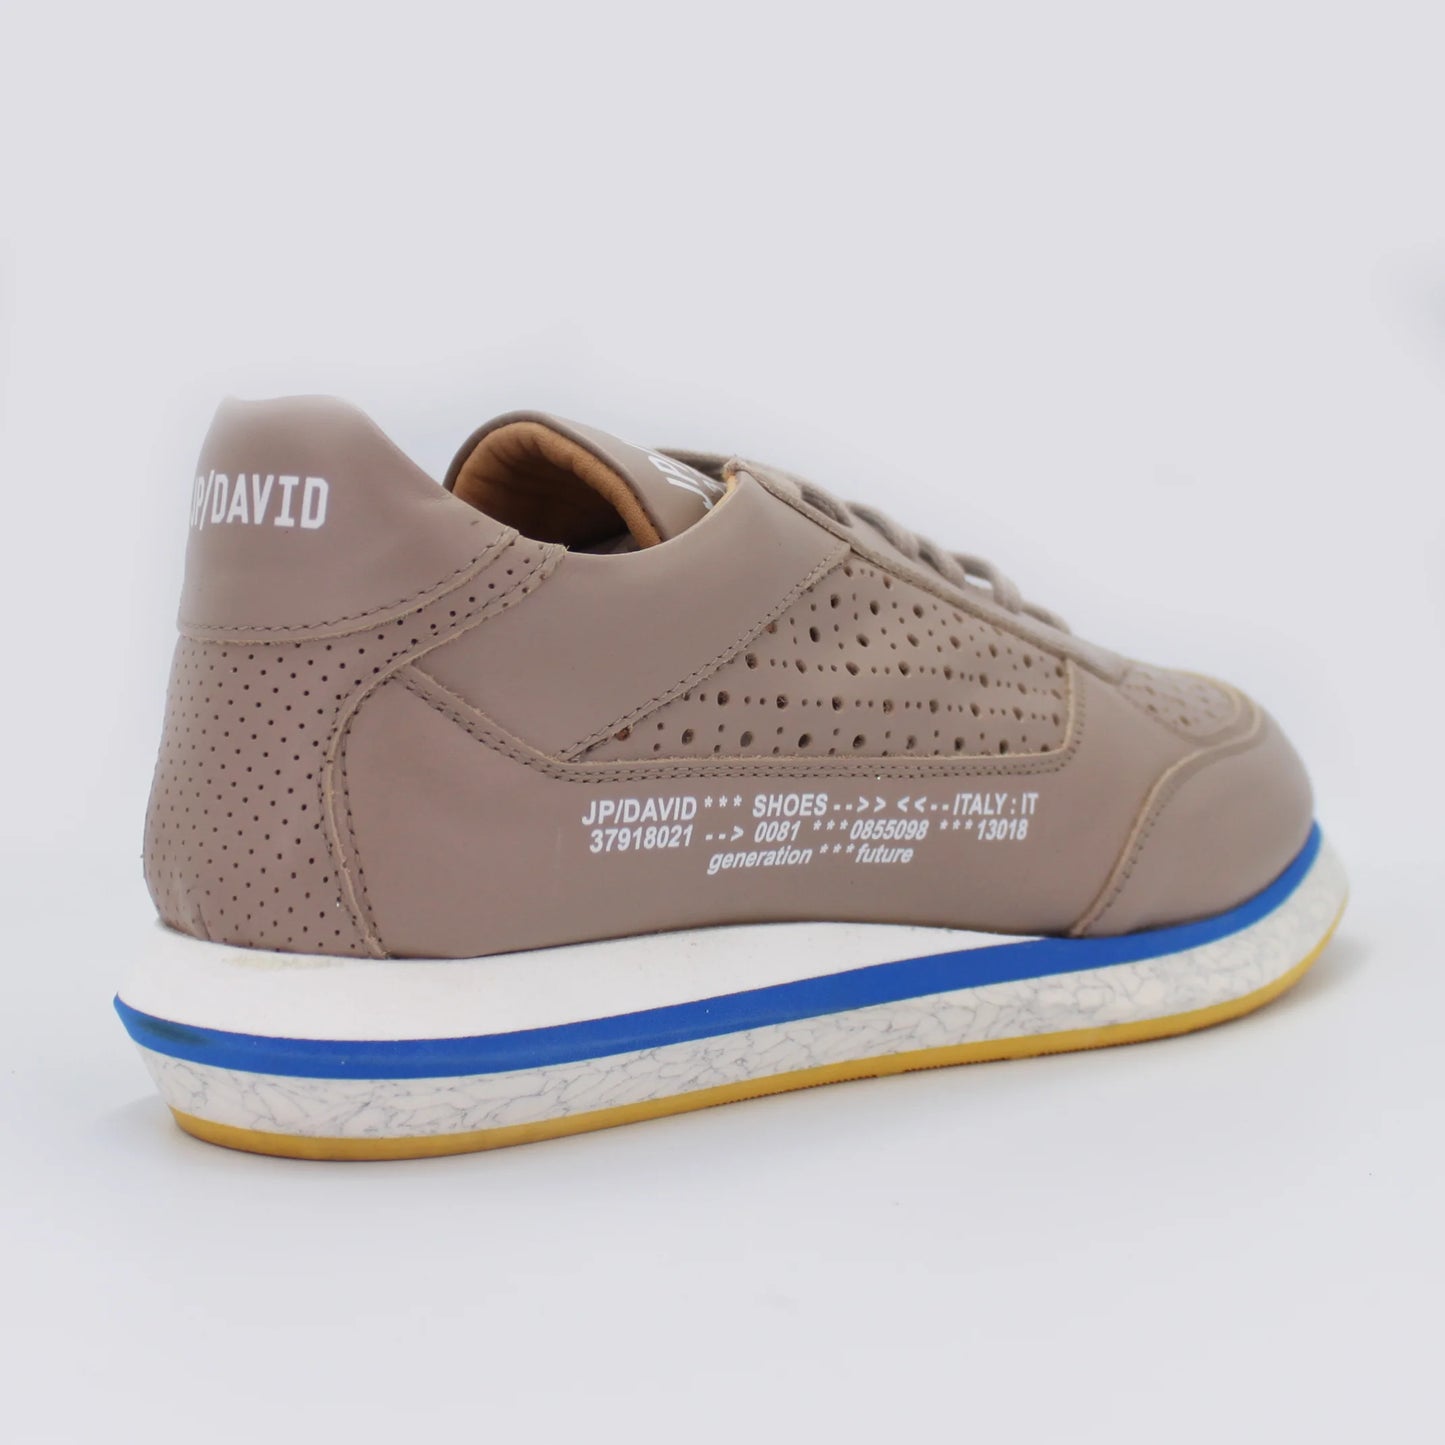 Men's genuine leather sneaker in beige made in Italy exclusively for Aliverti (JP2689/2BEI)